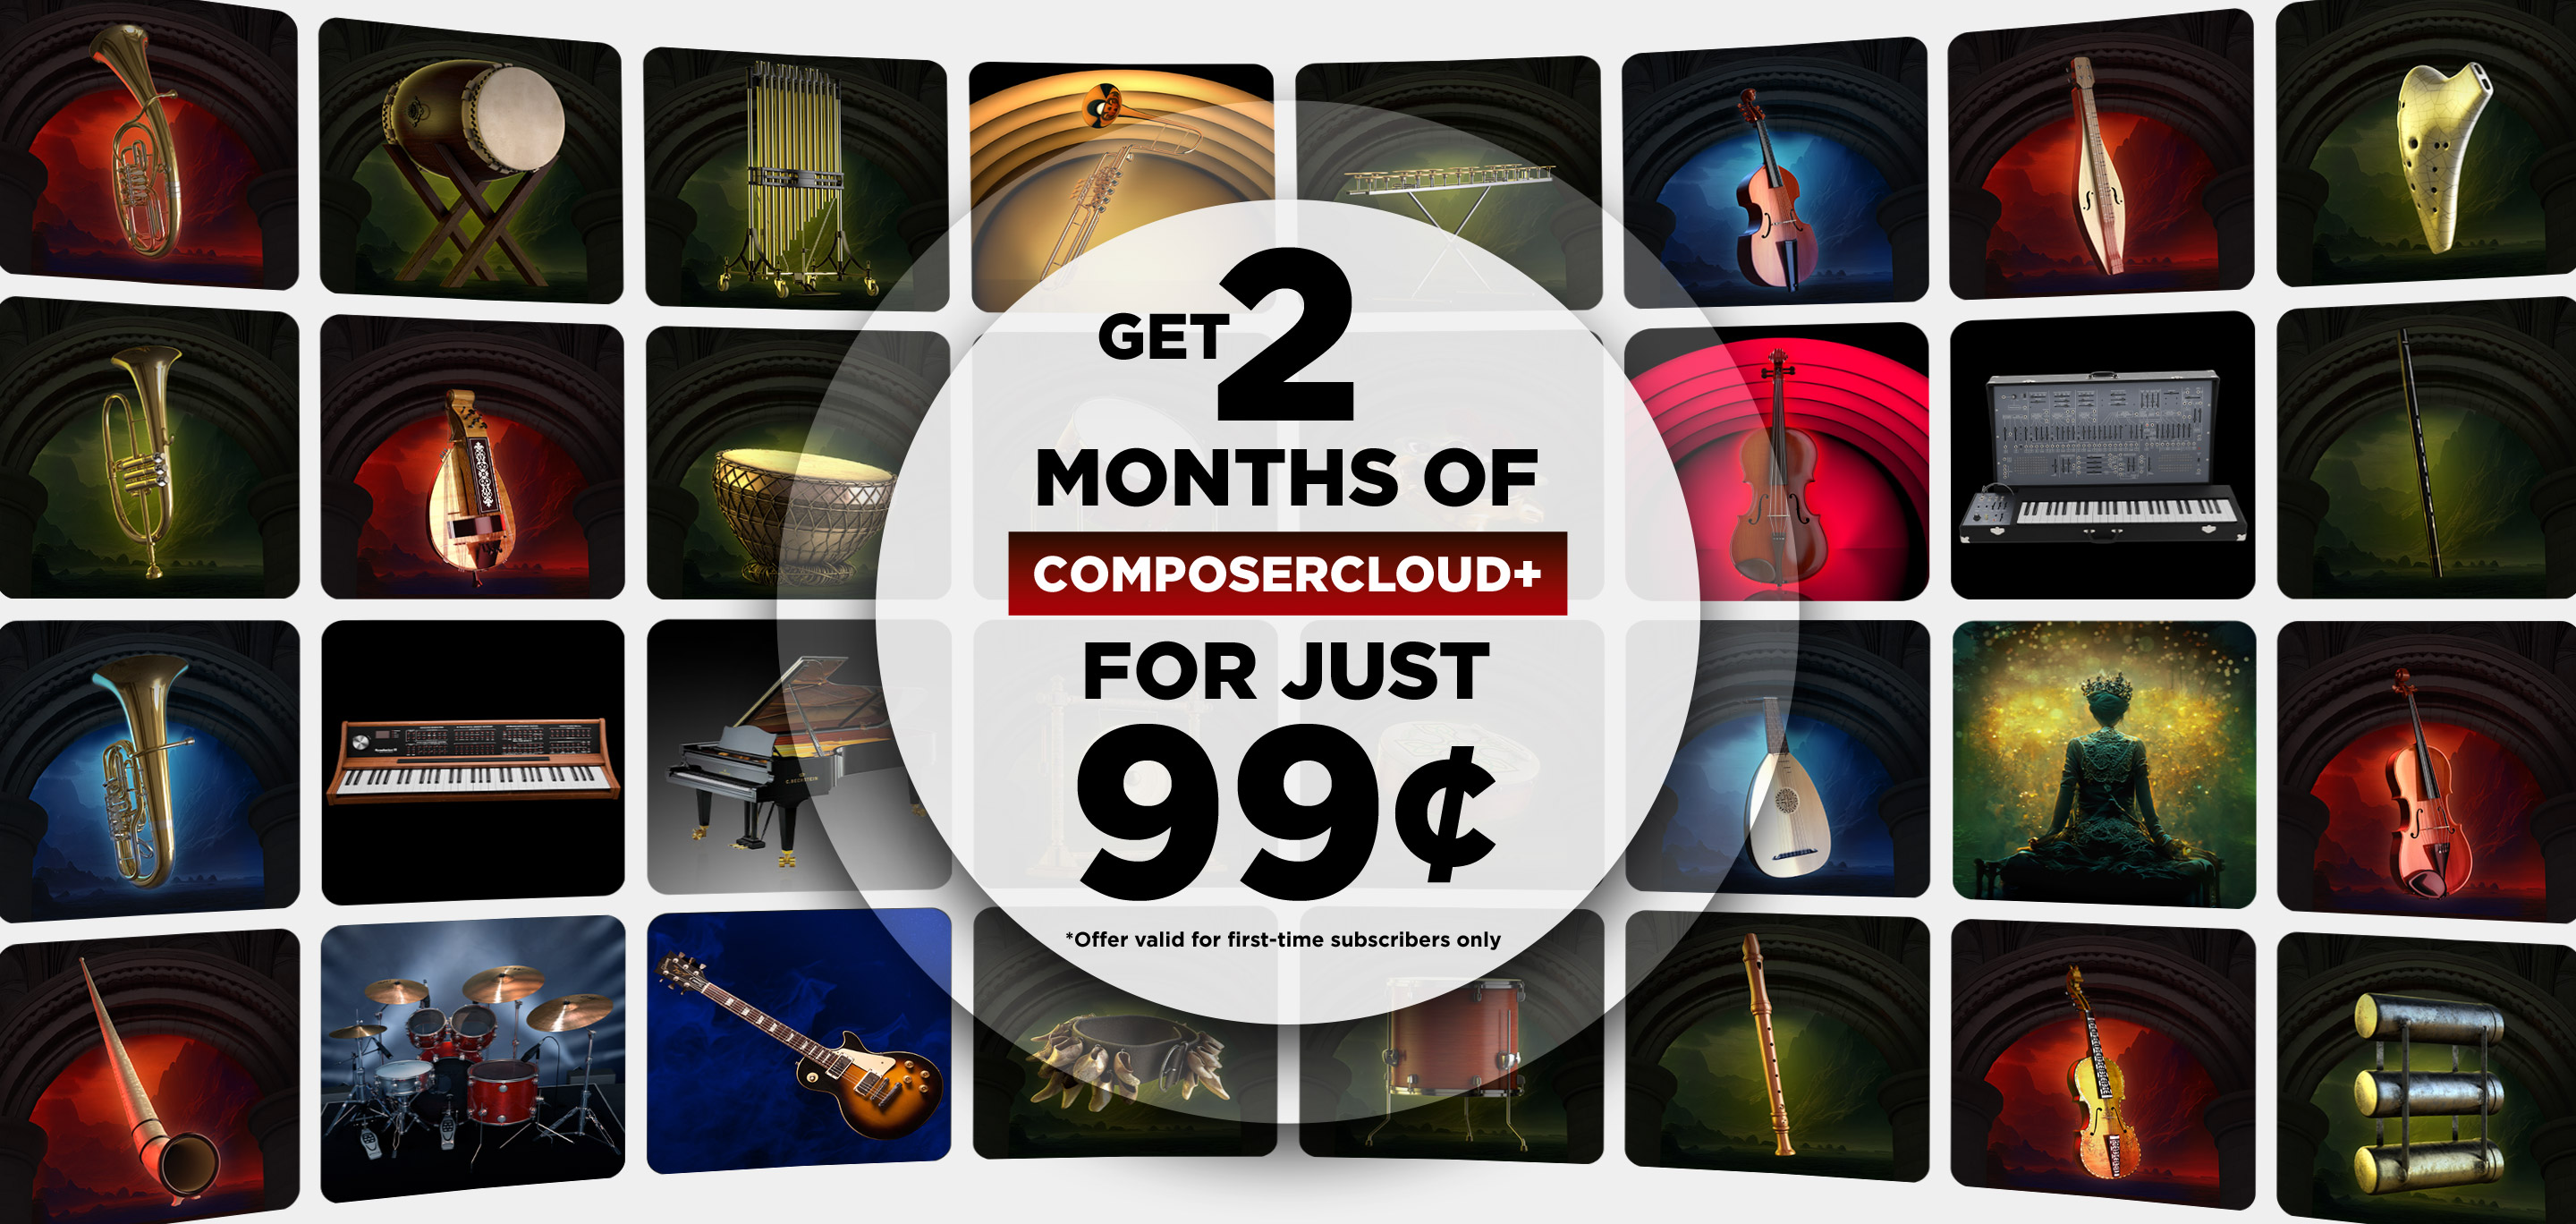 EastWest ComposerCloud+ - Get 2 Months of ComposerCloud+ for just 99 cents